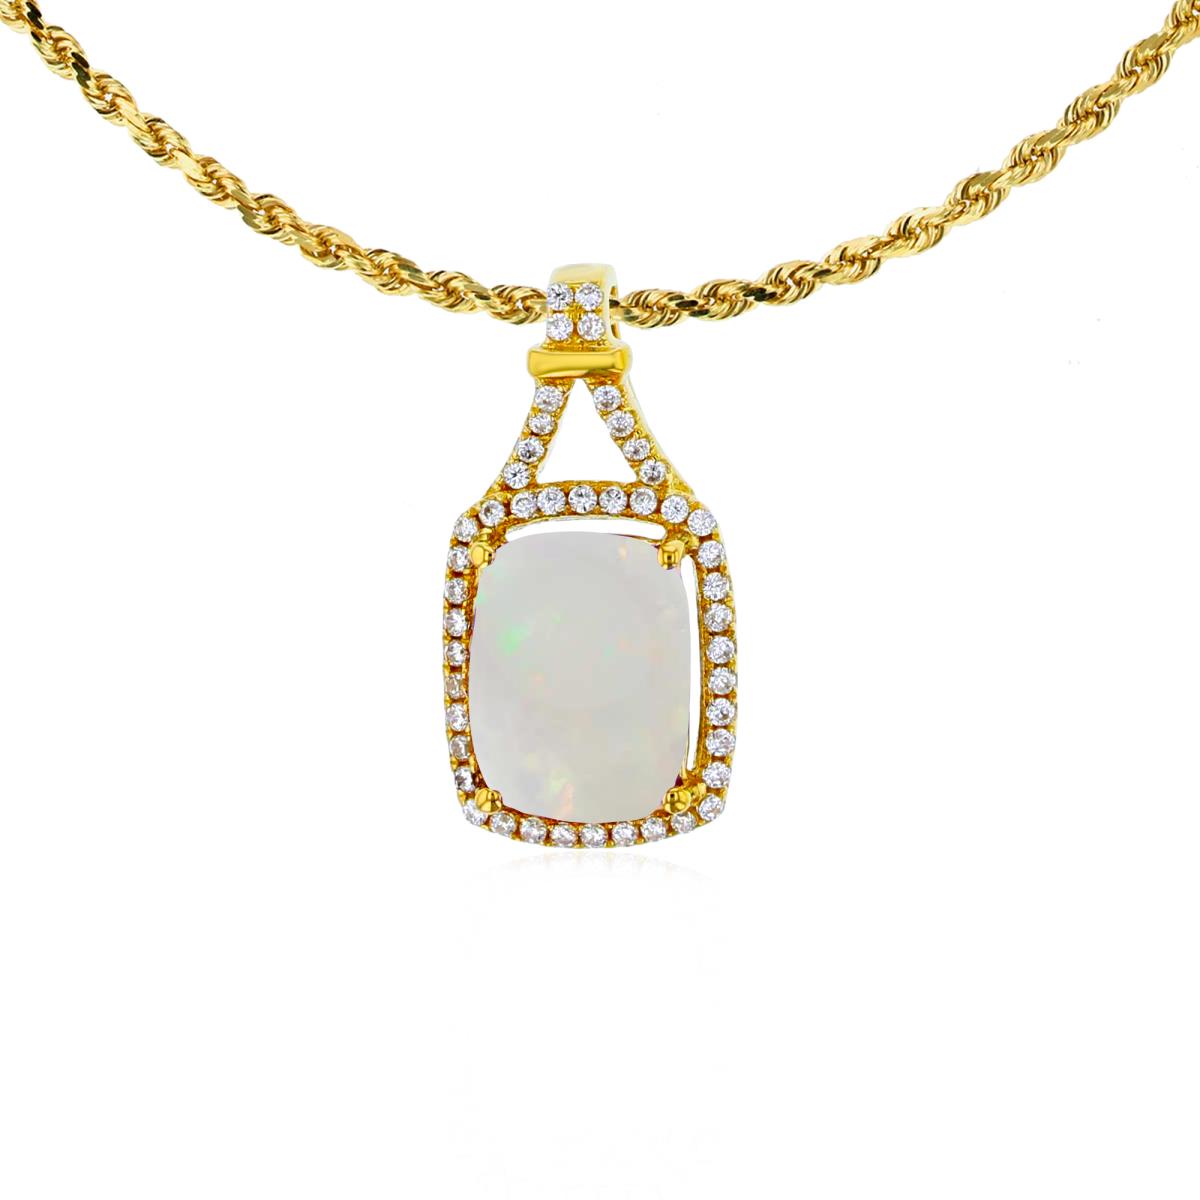 10K Yellow Gold 8x6mm Cushion Opal & 0.13 CTTW Rd Diamonds Halo 18" Rope Chain Necklace